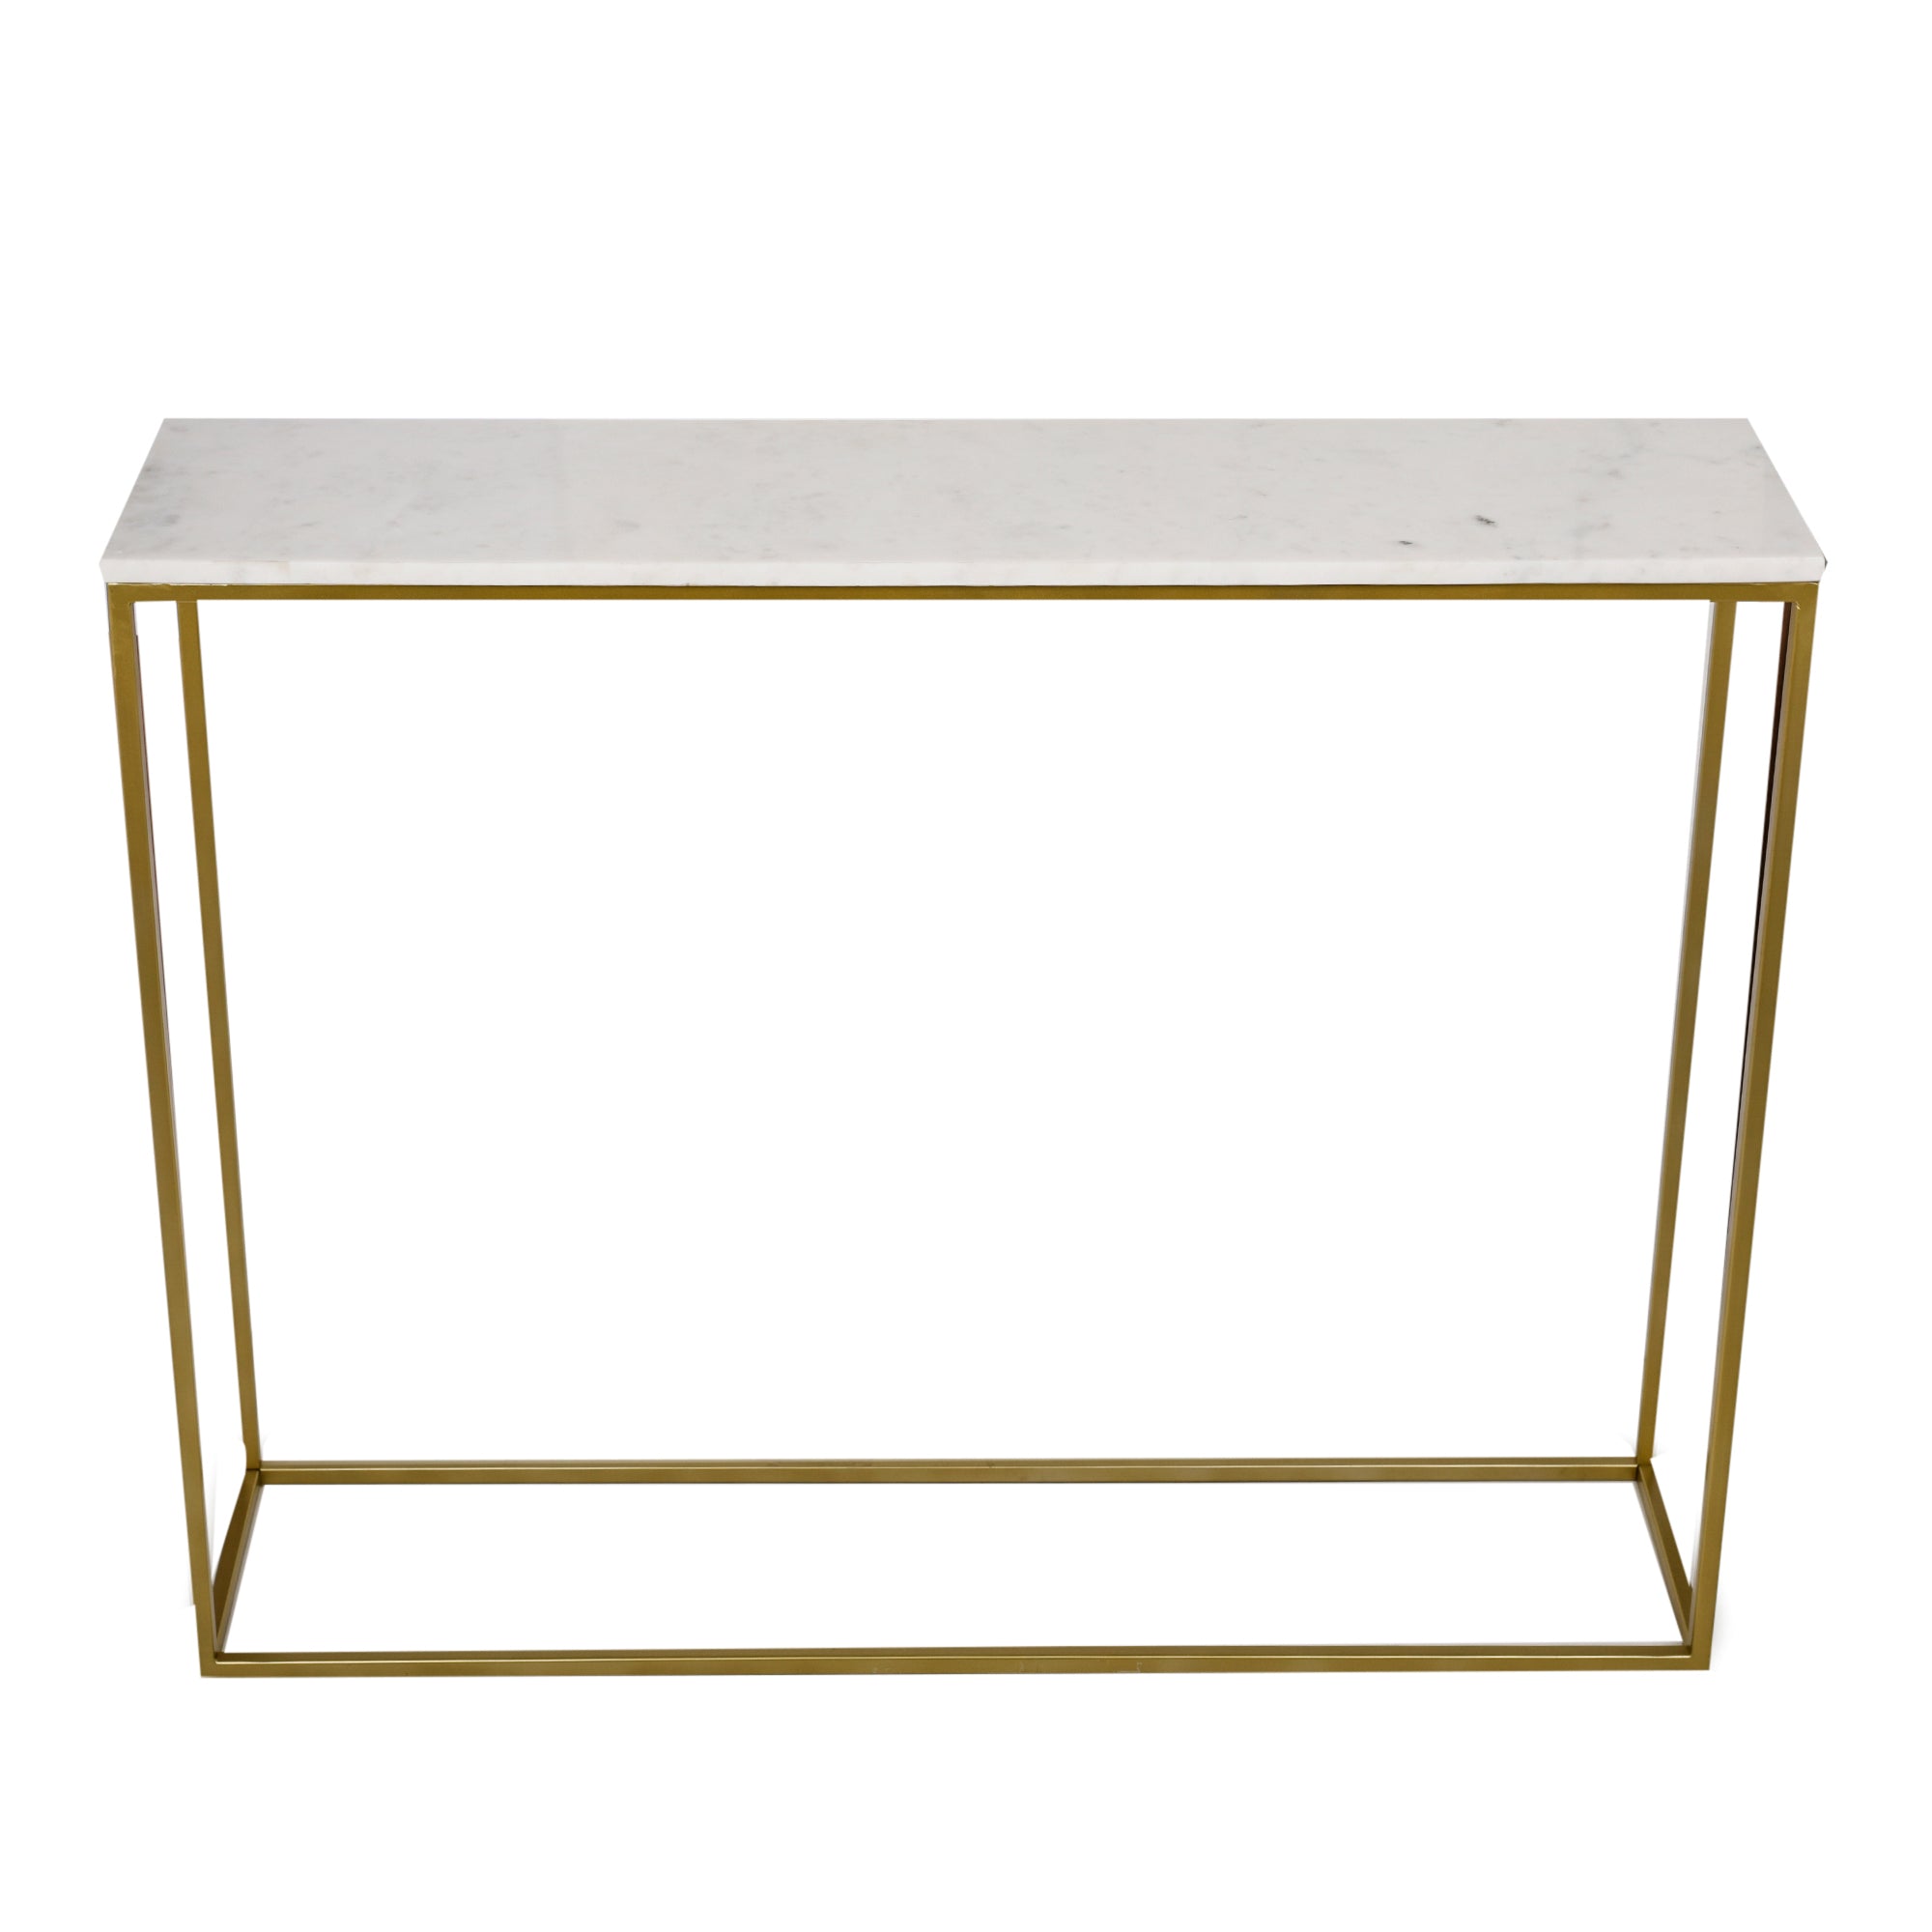 Nested Console Table Set of 2 Marble Top Gold Finish Legs 35 Inches Long